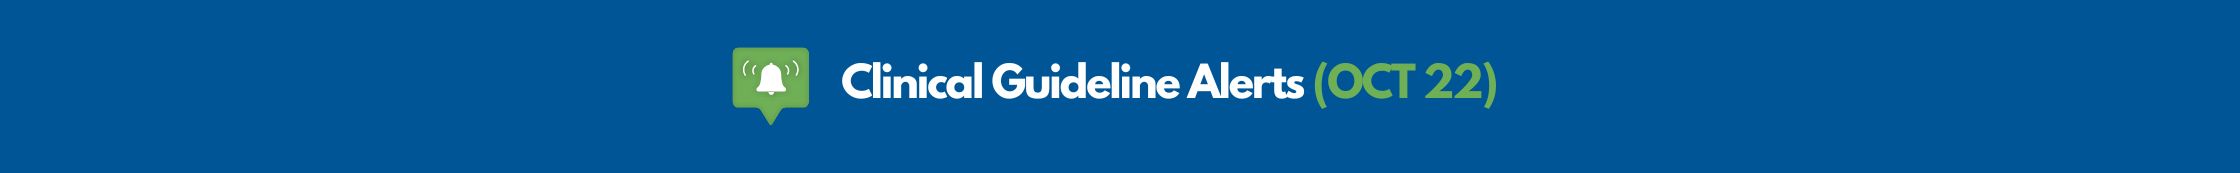 Clinical Guidelines Alerts (Oct 22) Banner Image